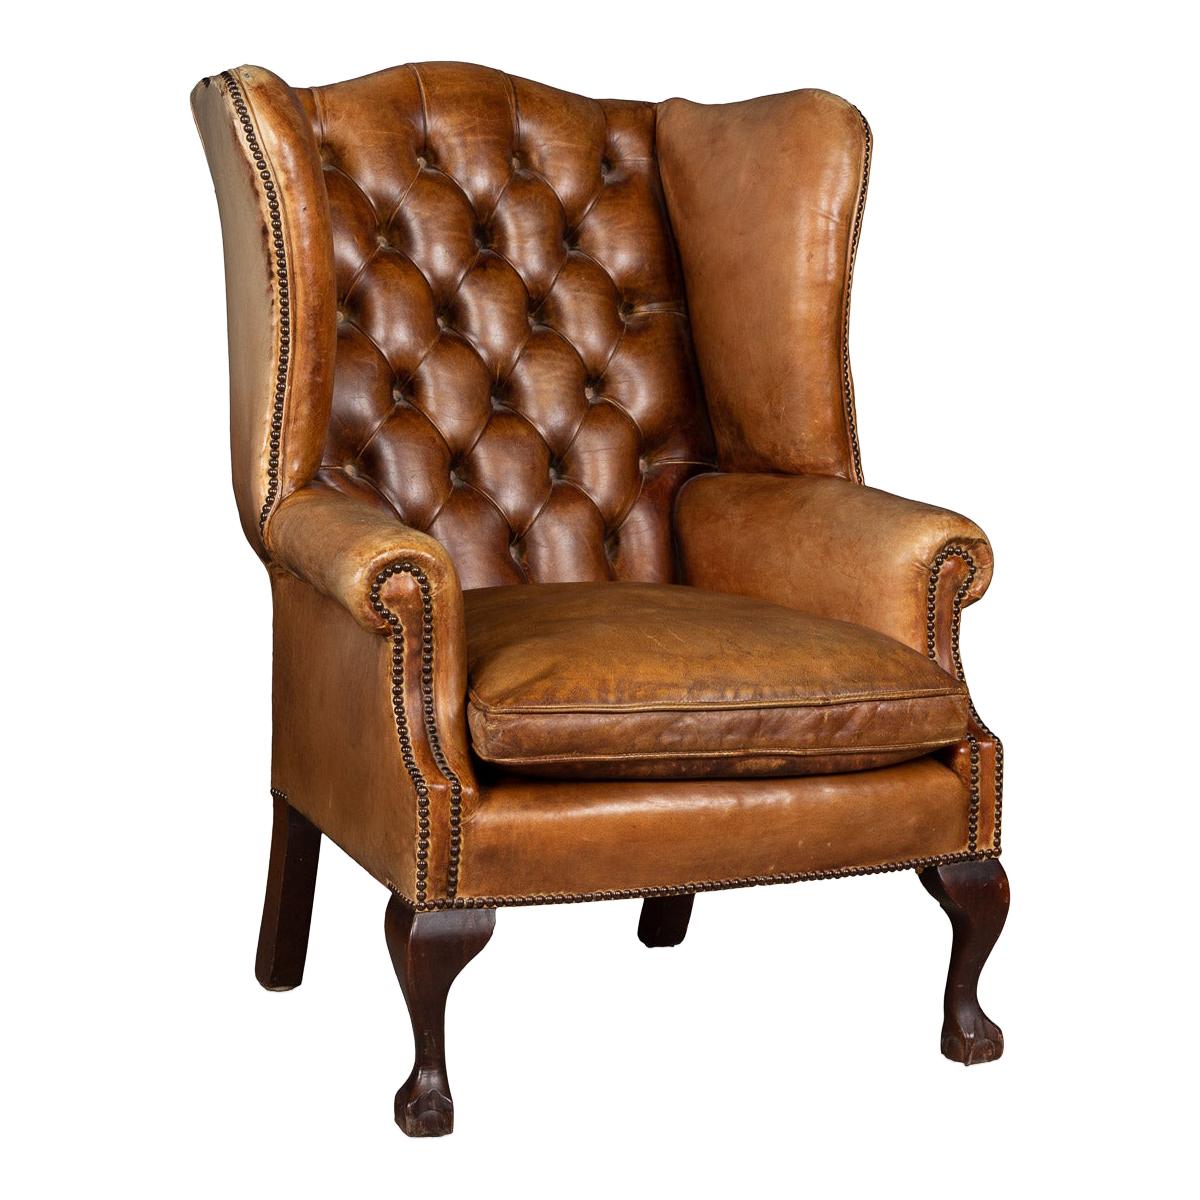 Mid-20th Century English Leather Wing Back Chair, circa 1960